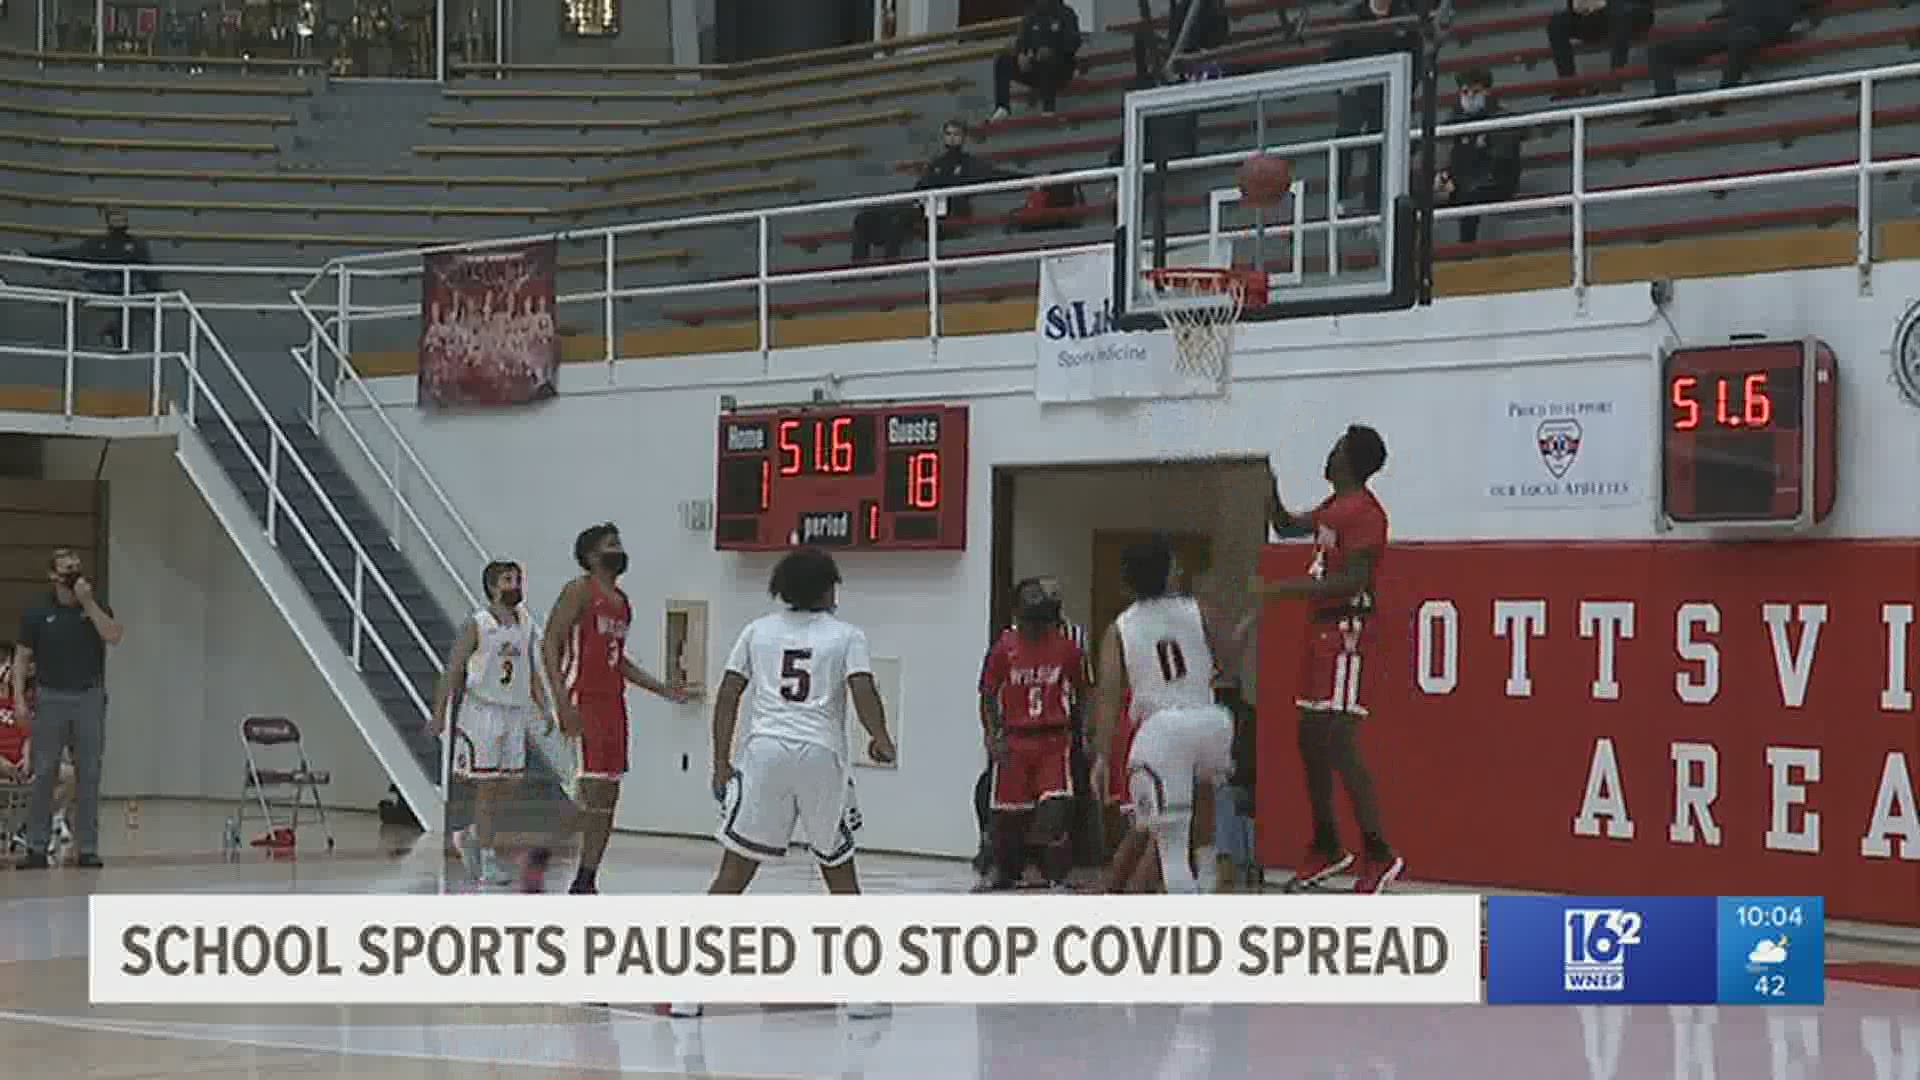 With just one day before the restrictions began, the Pottsville Area School District decided to hold its first and possibly last basketball game Friday.